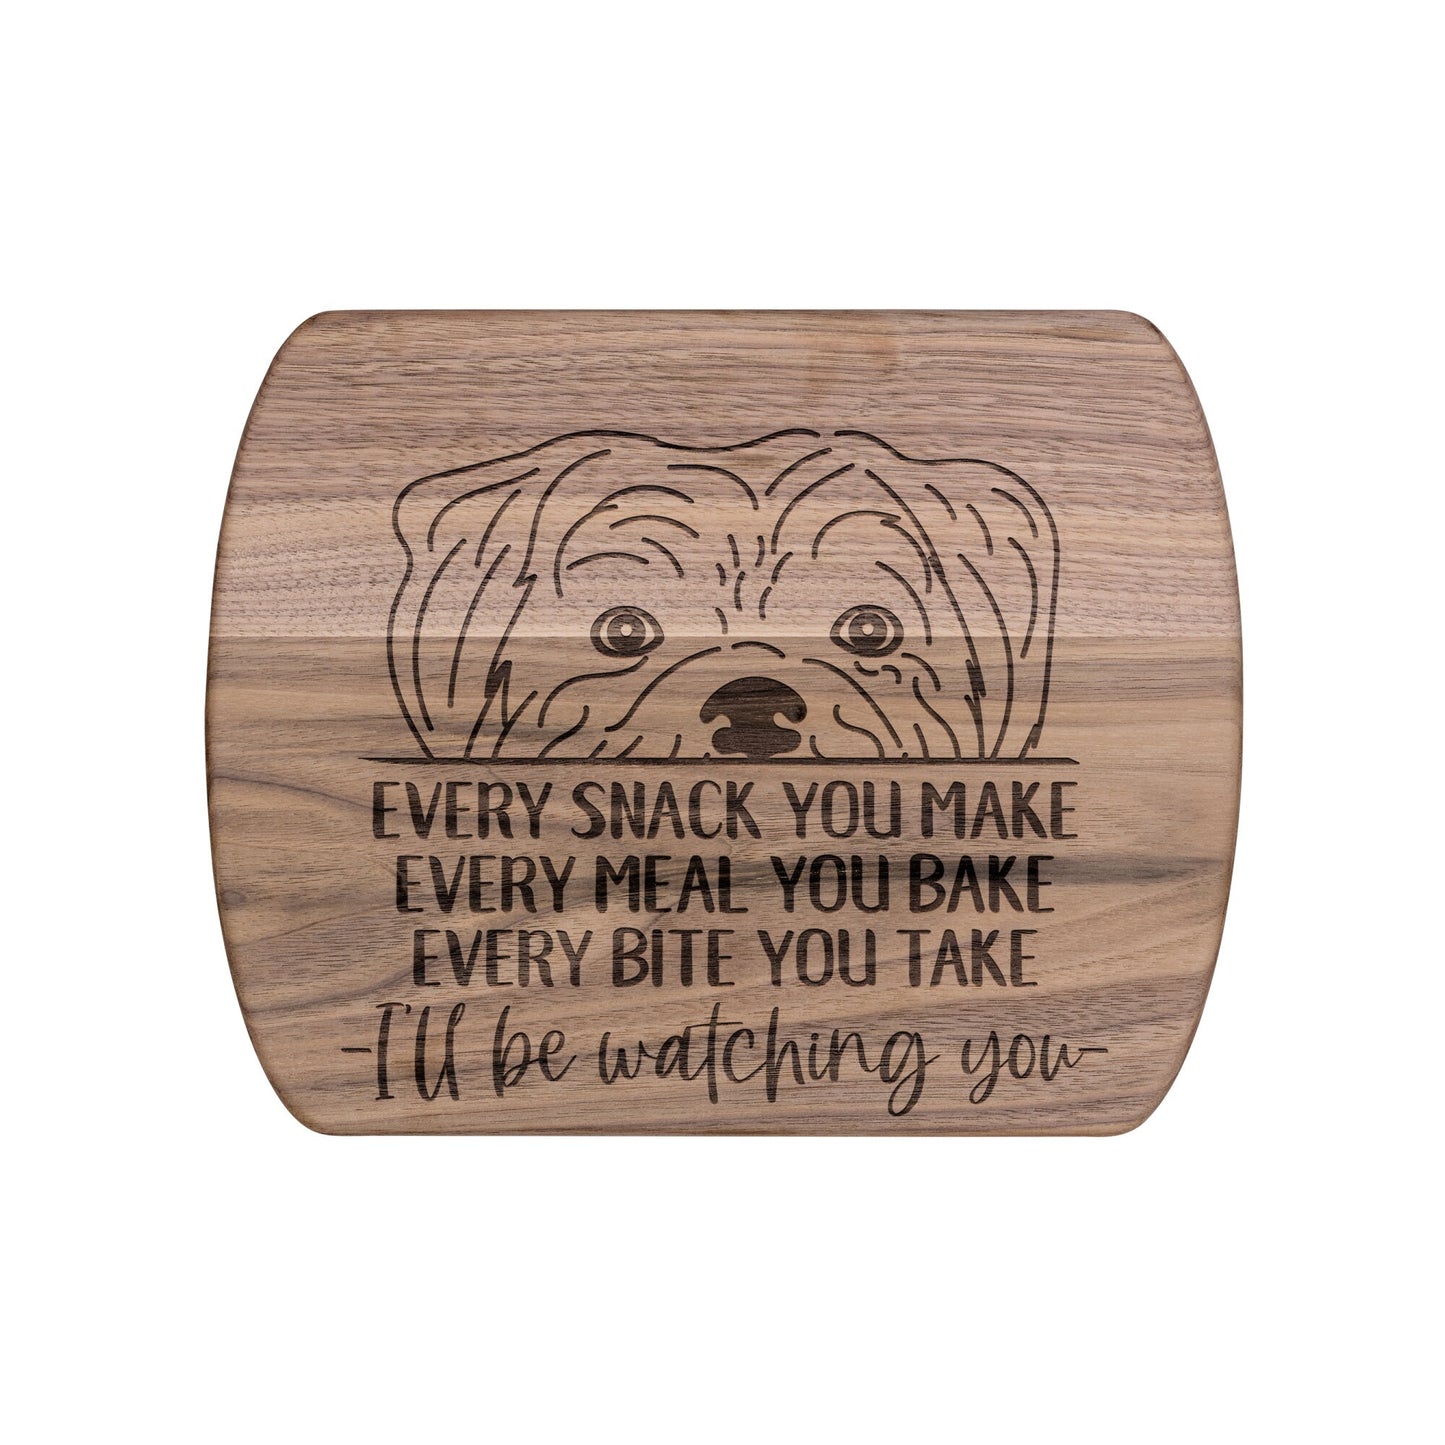 Affenpinscher Dog Snack Funny Cutting Board for Dog Mom, Dog Lover Wood Serving Board, Charcuterie Board, Wooden Chopping Board Gift for Him